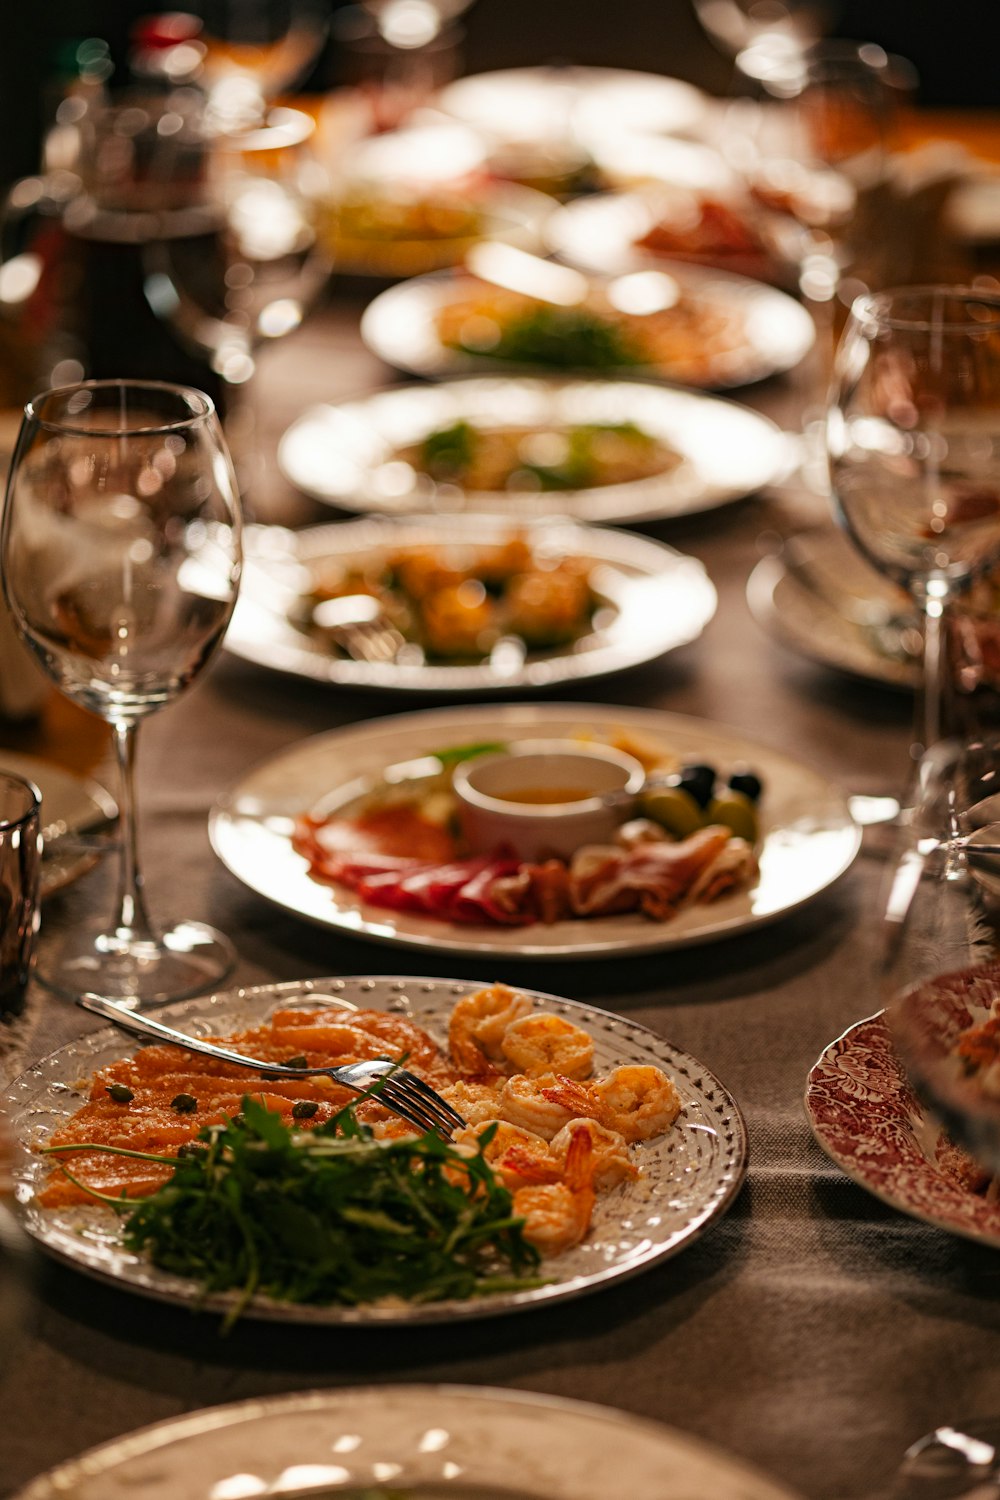 a long table with plates of food and wine glasses